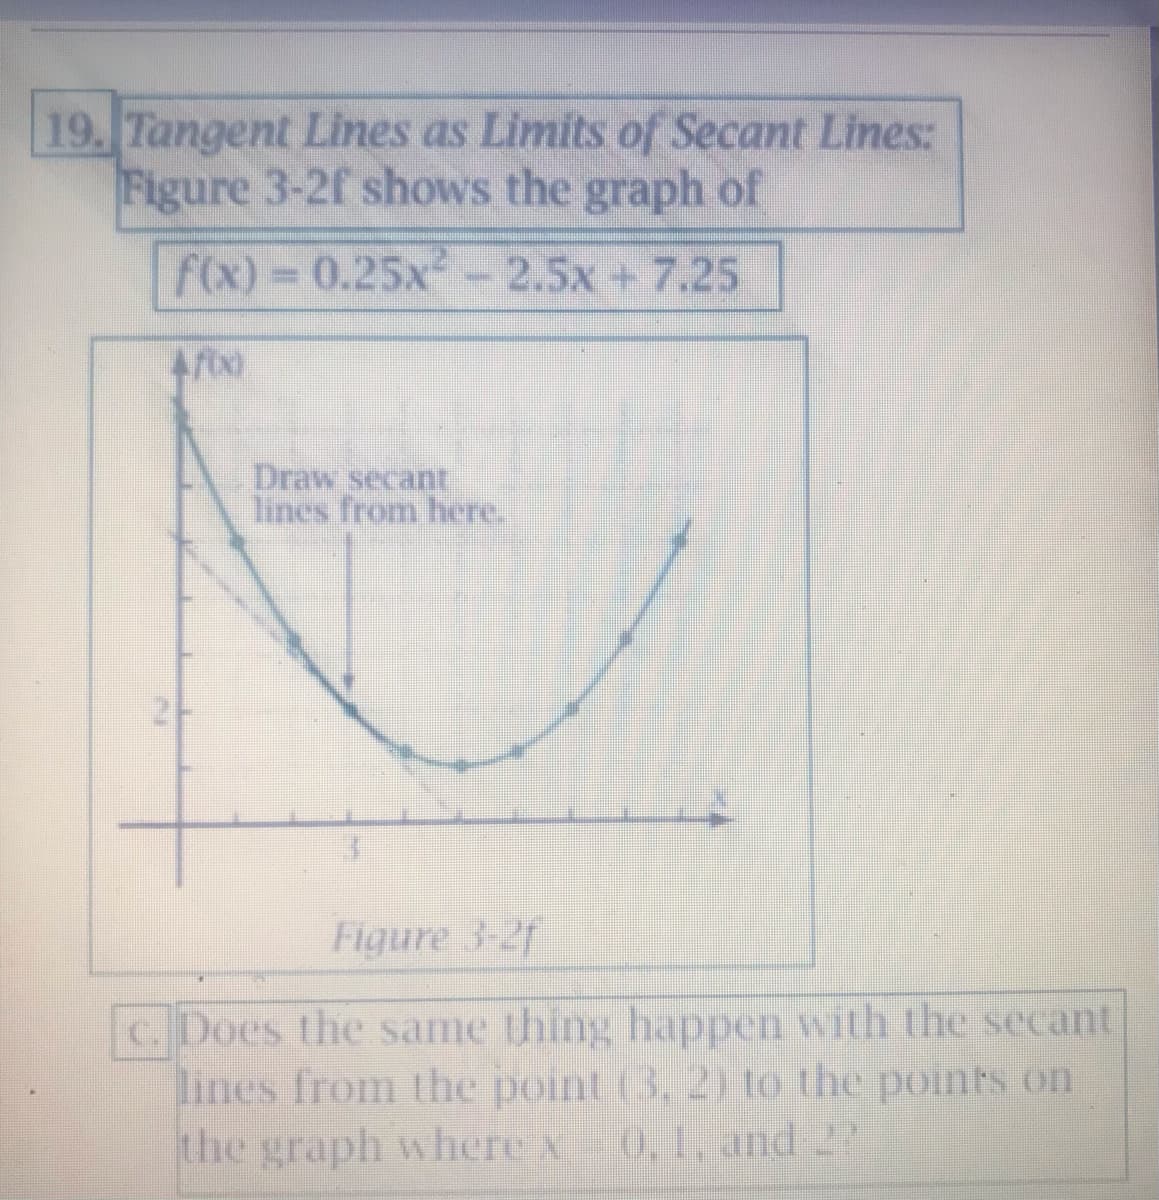 19. Tangent Lines as Limits of Secant Lines:
Figure 3-2f shows the graph of
f(x) 0.25x-2.5x+7.25
%3D
Draw secant
lines from here.
2-
Figure 3-2f
C. Does the same thing happen with the secant
lines from the pont 1o the points on
0,1, and 2
the graph where s
